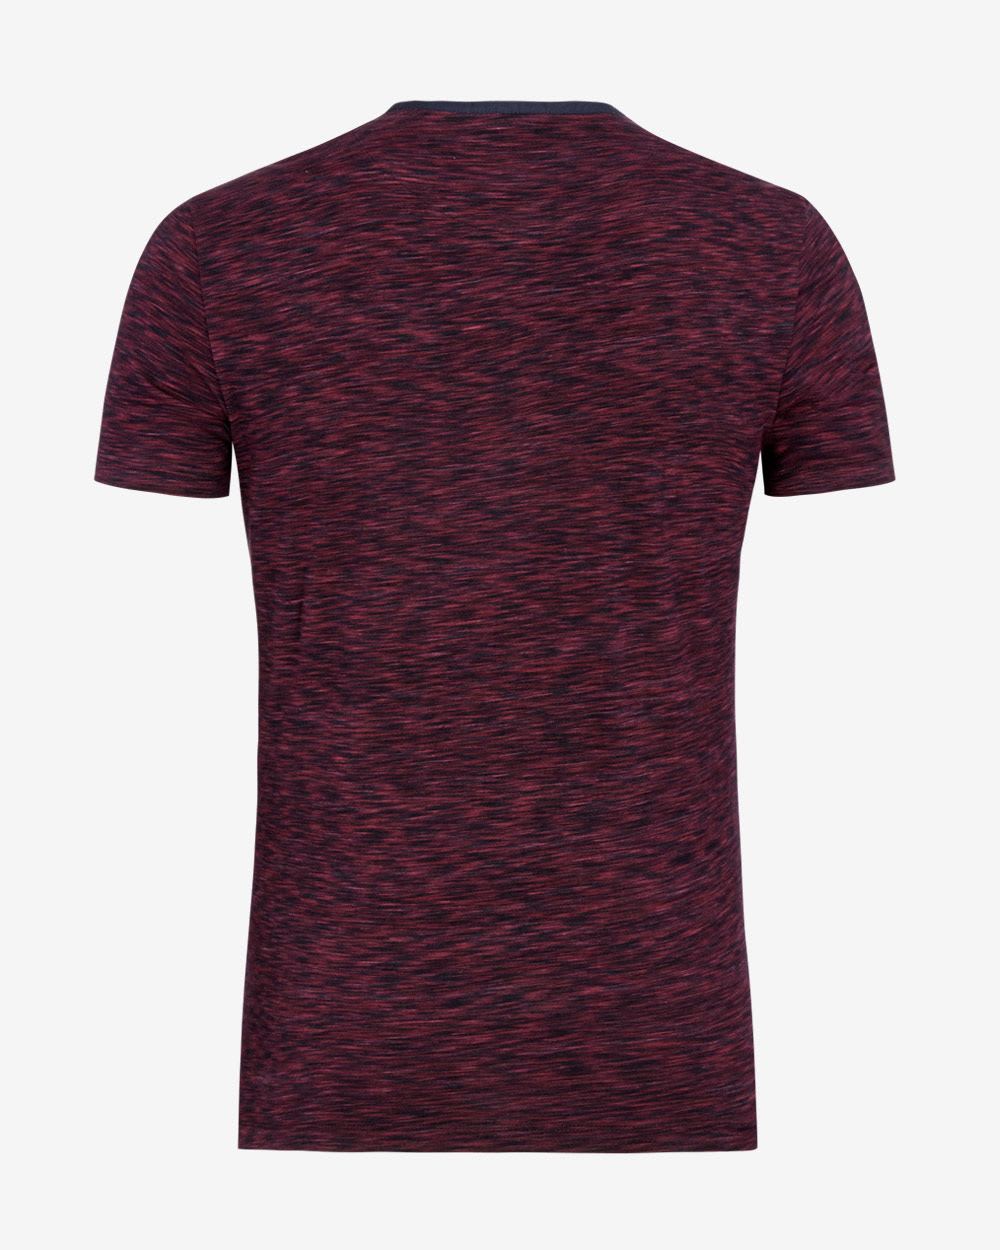 Space dye Henley t-shirt with pocket | RW&CO.